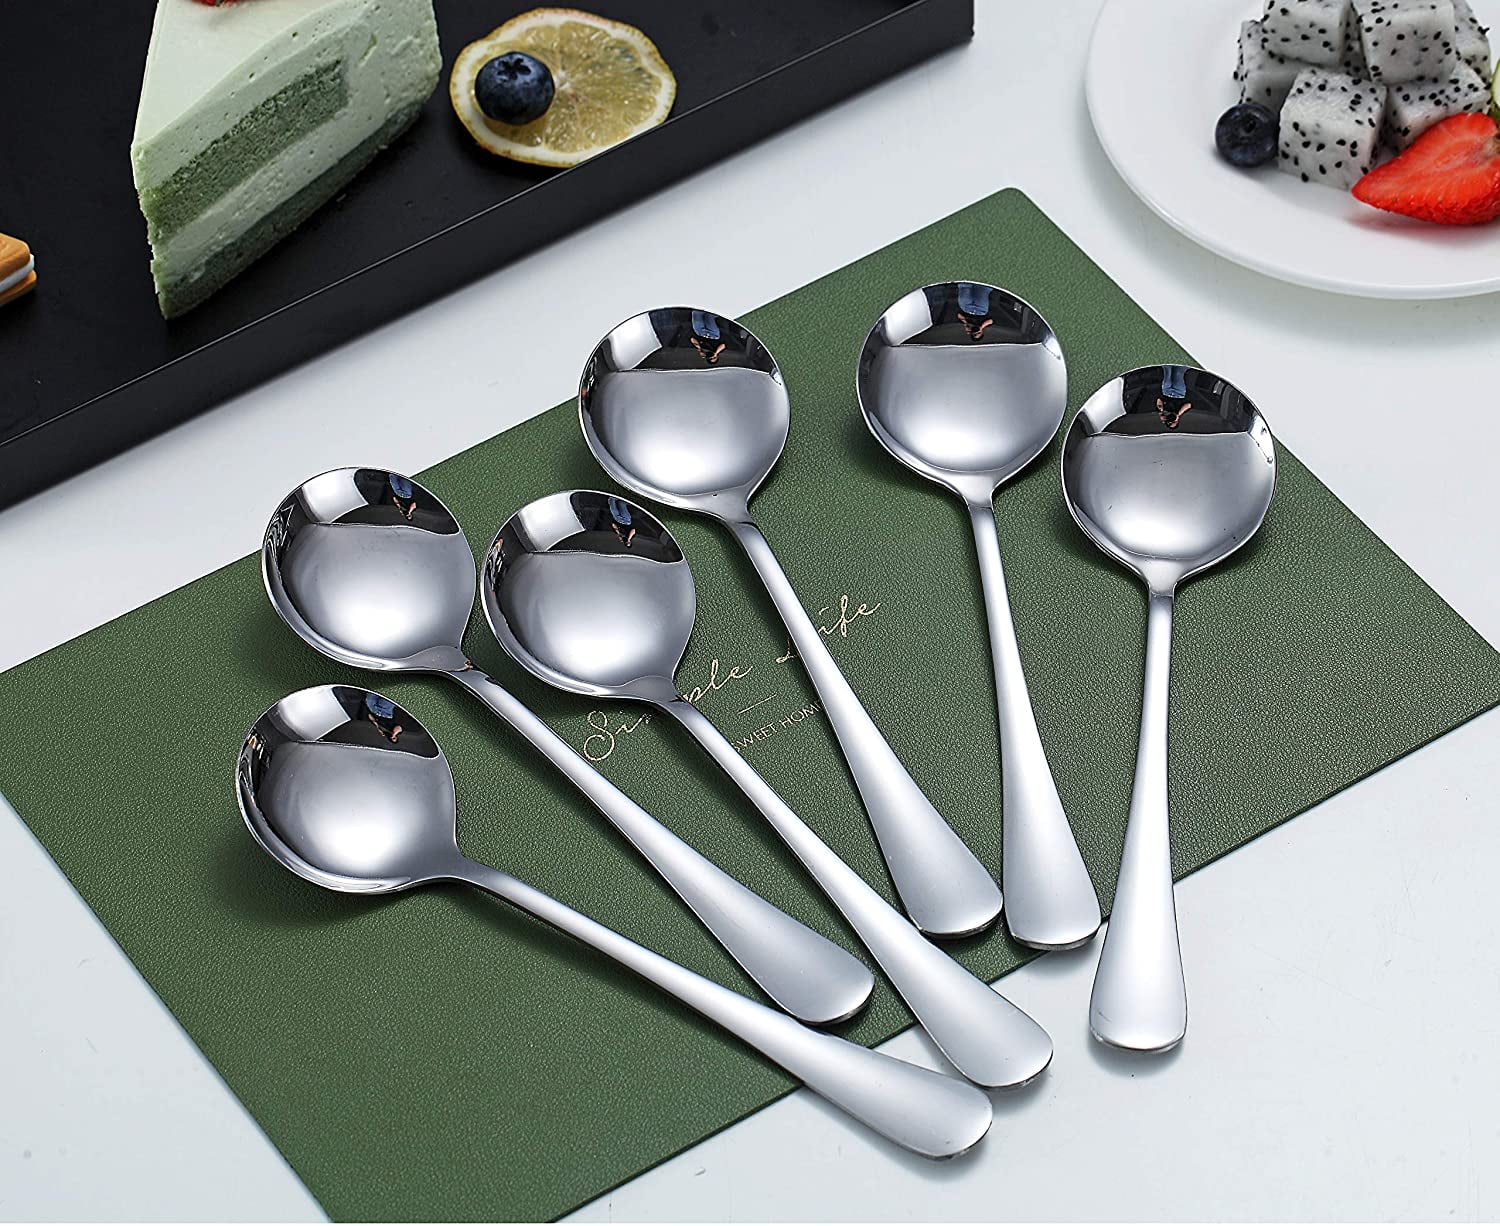 Goeielewe Dinner Spoons Set of 6, Stainless Steel Iced Teaspoons with Ceramic Handle 6.8-inch Long Soup Tablespoons Espresso